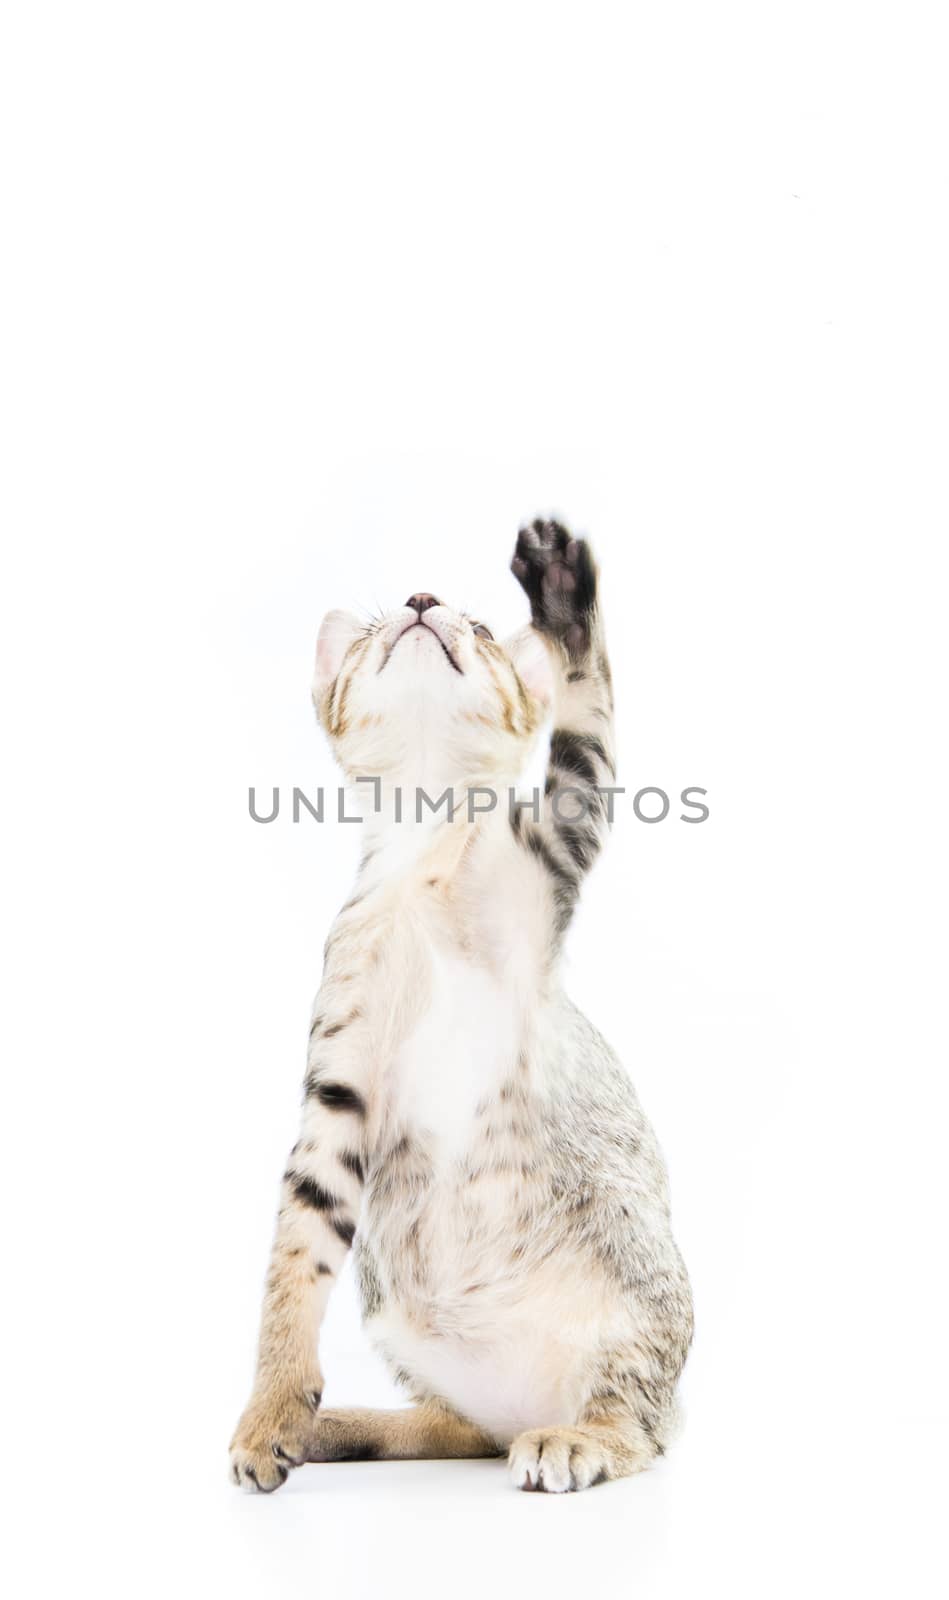 playful toyger kitten stand up show hand isolated on over white background